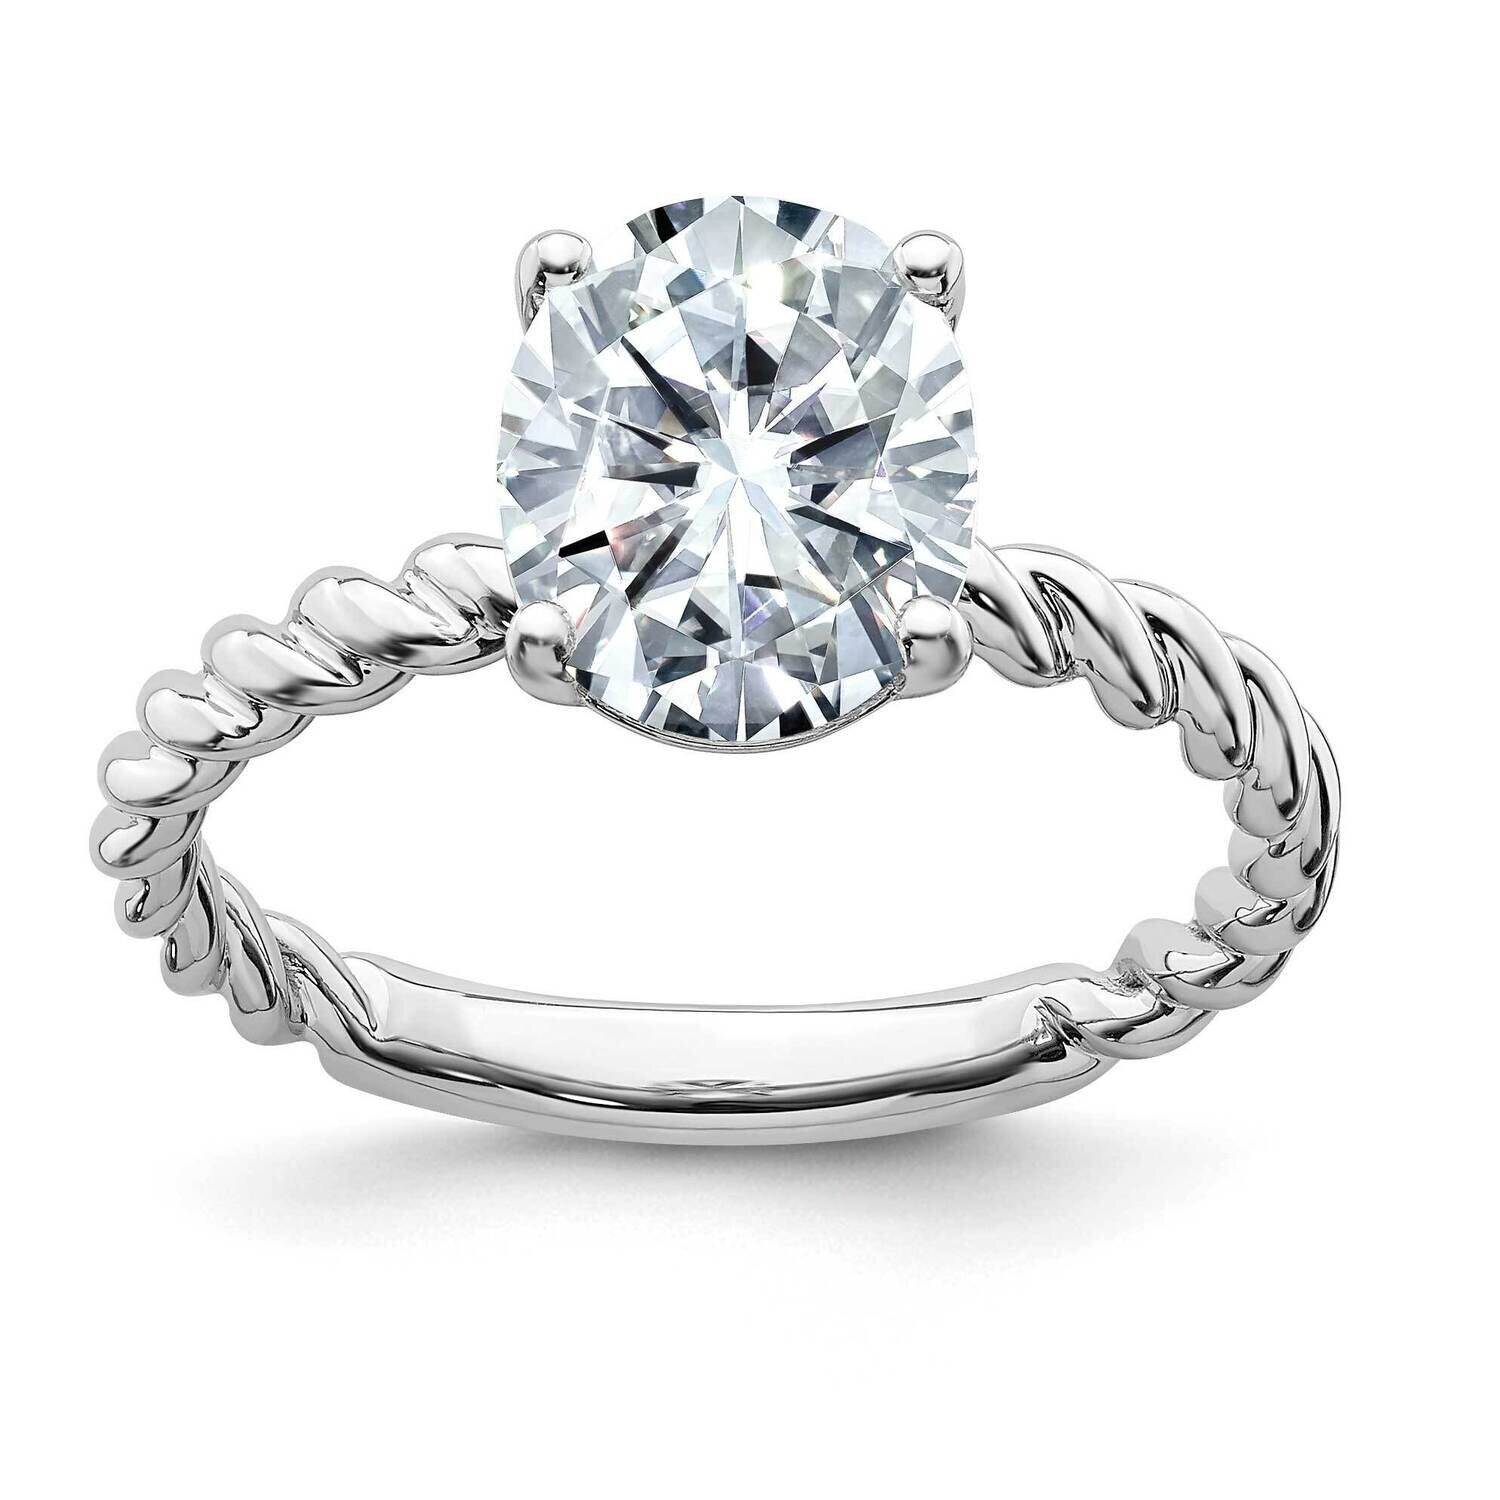 2ct. G H I True Light Oval Twisted Moissanite Solitaire Ring 14k White Gold RM6799-210-WMT